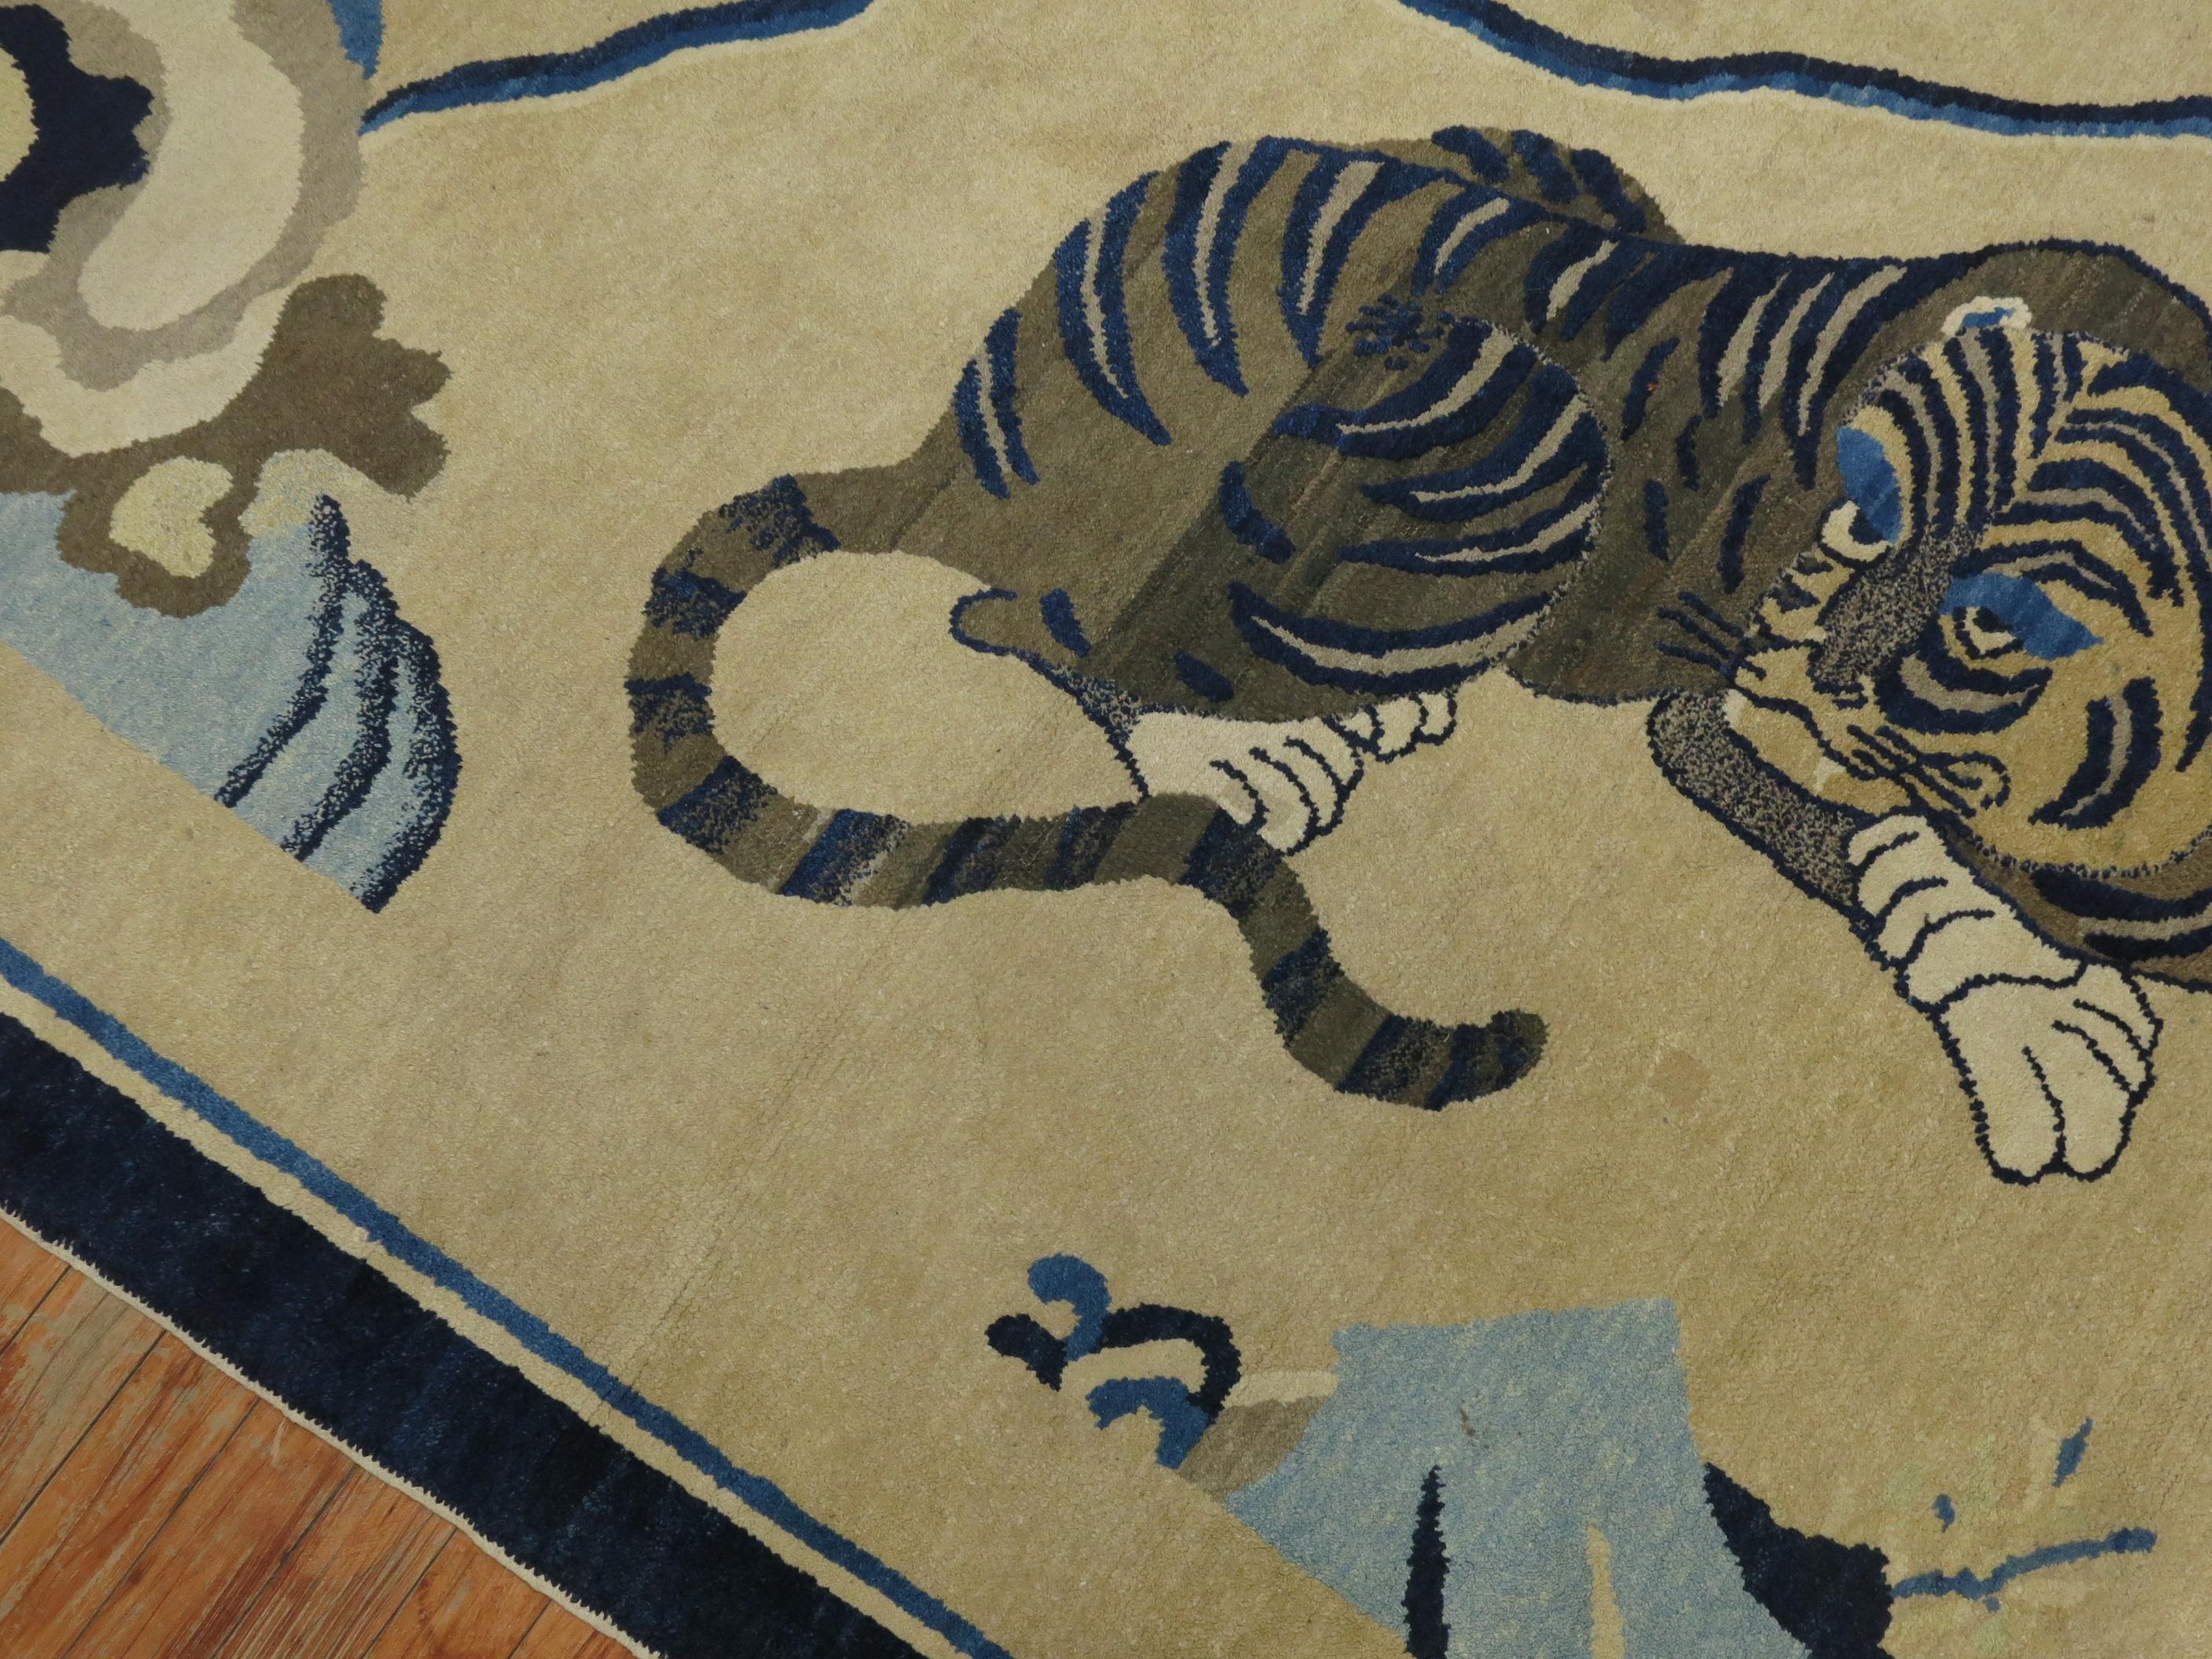 Hand-Woven Spiritual Chinese Antique Tiger Pictorial Rug, Dated 1926 For Sale